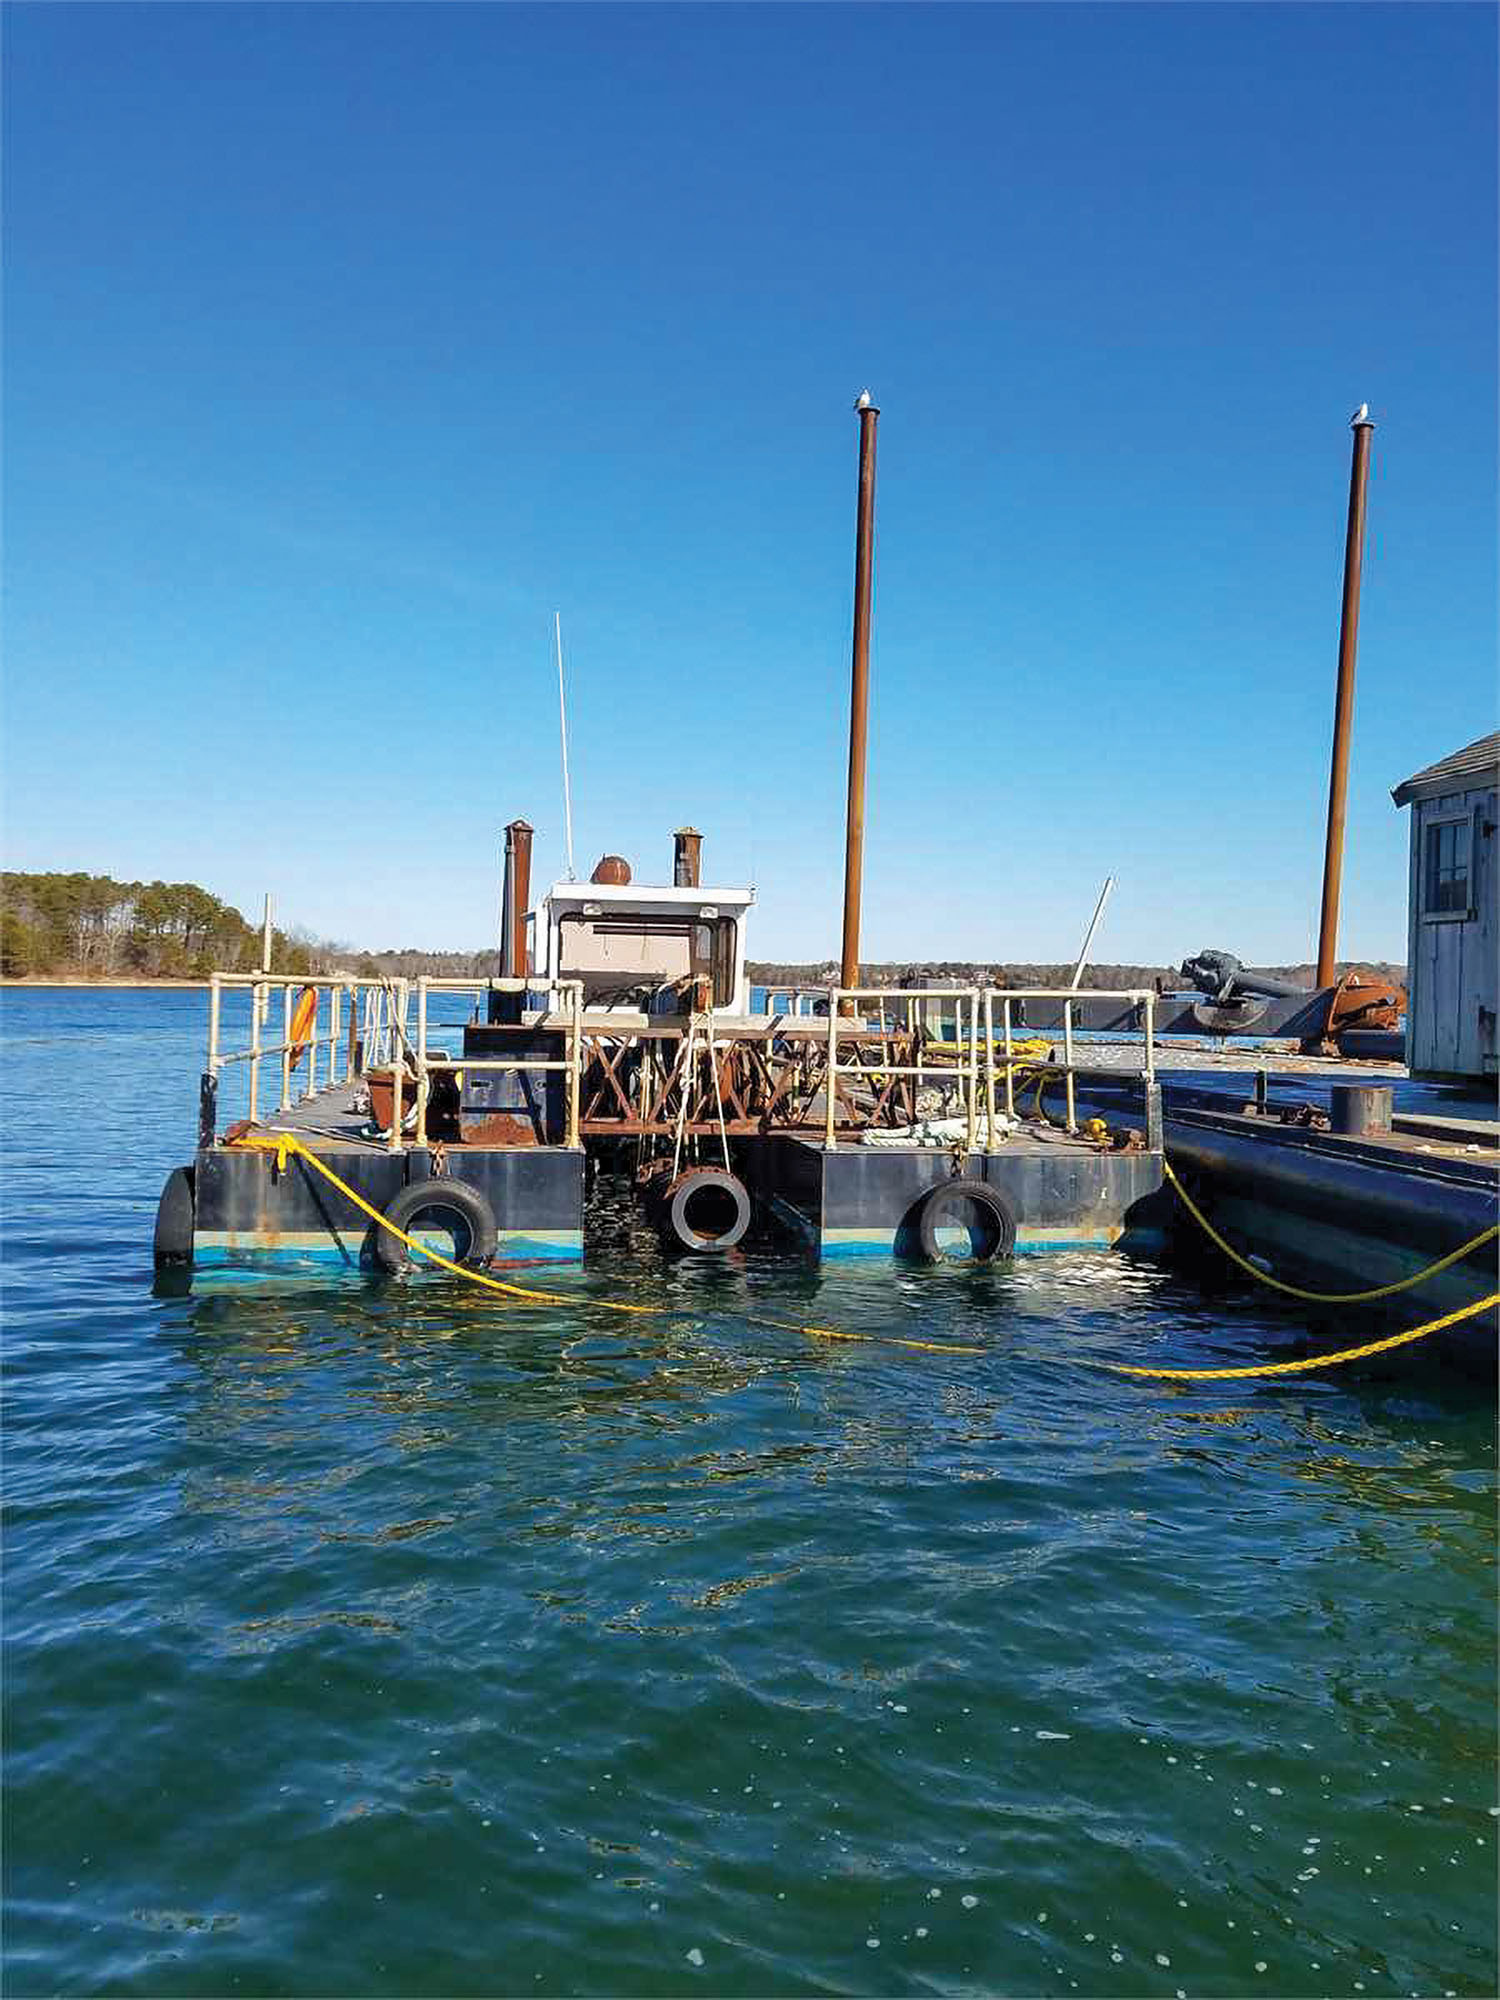 The cutterhead dredge Cod Fish I is being sold at a government surplus auction website. Bids are being taken until May 23. (Photo courtesy of Henderson Public Relations)